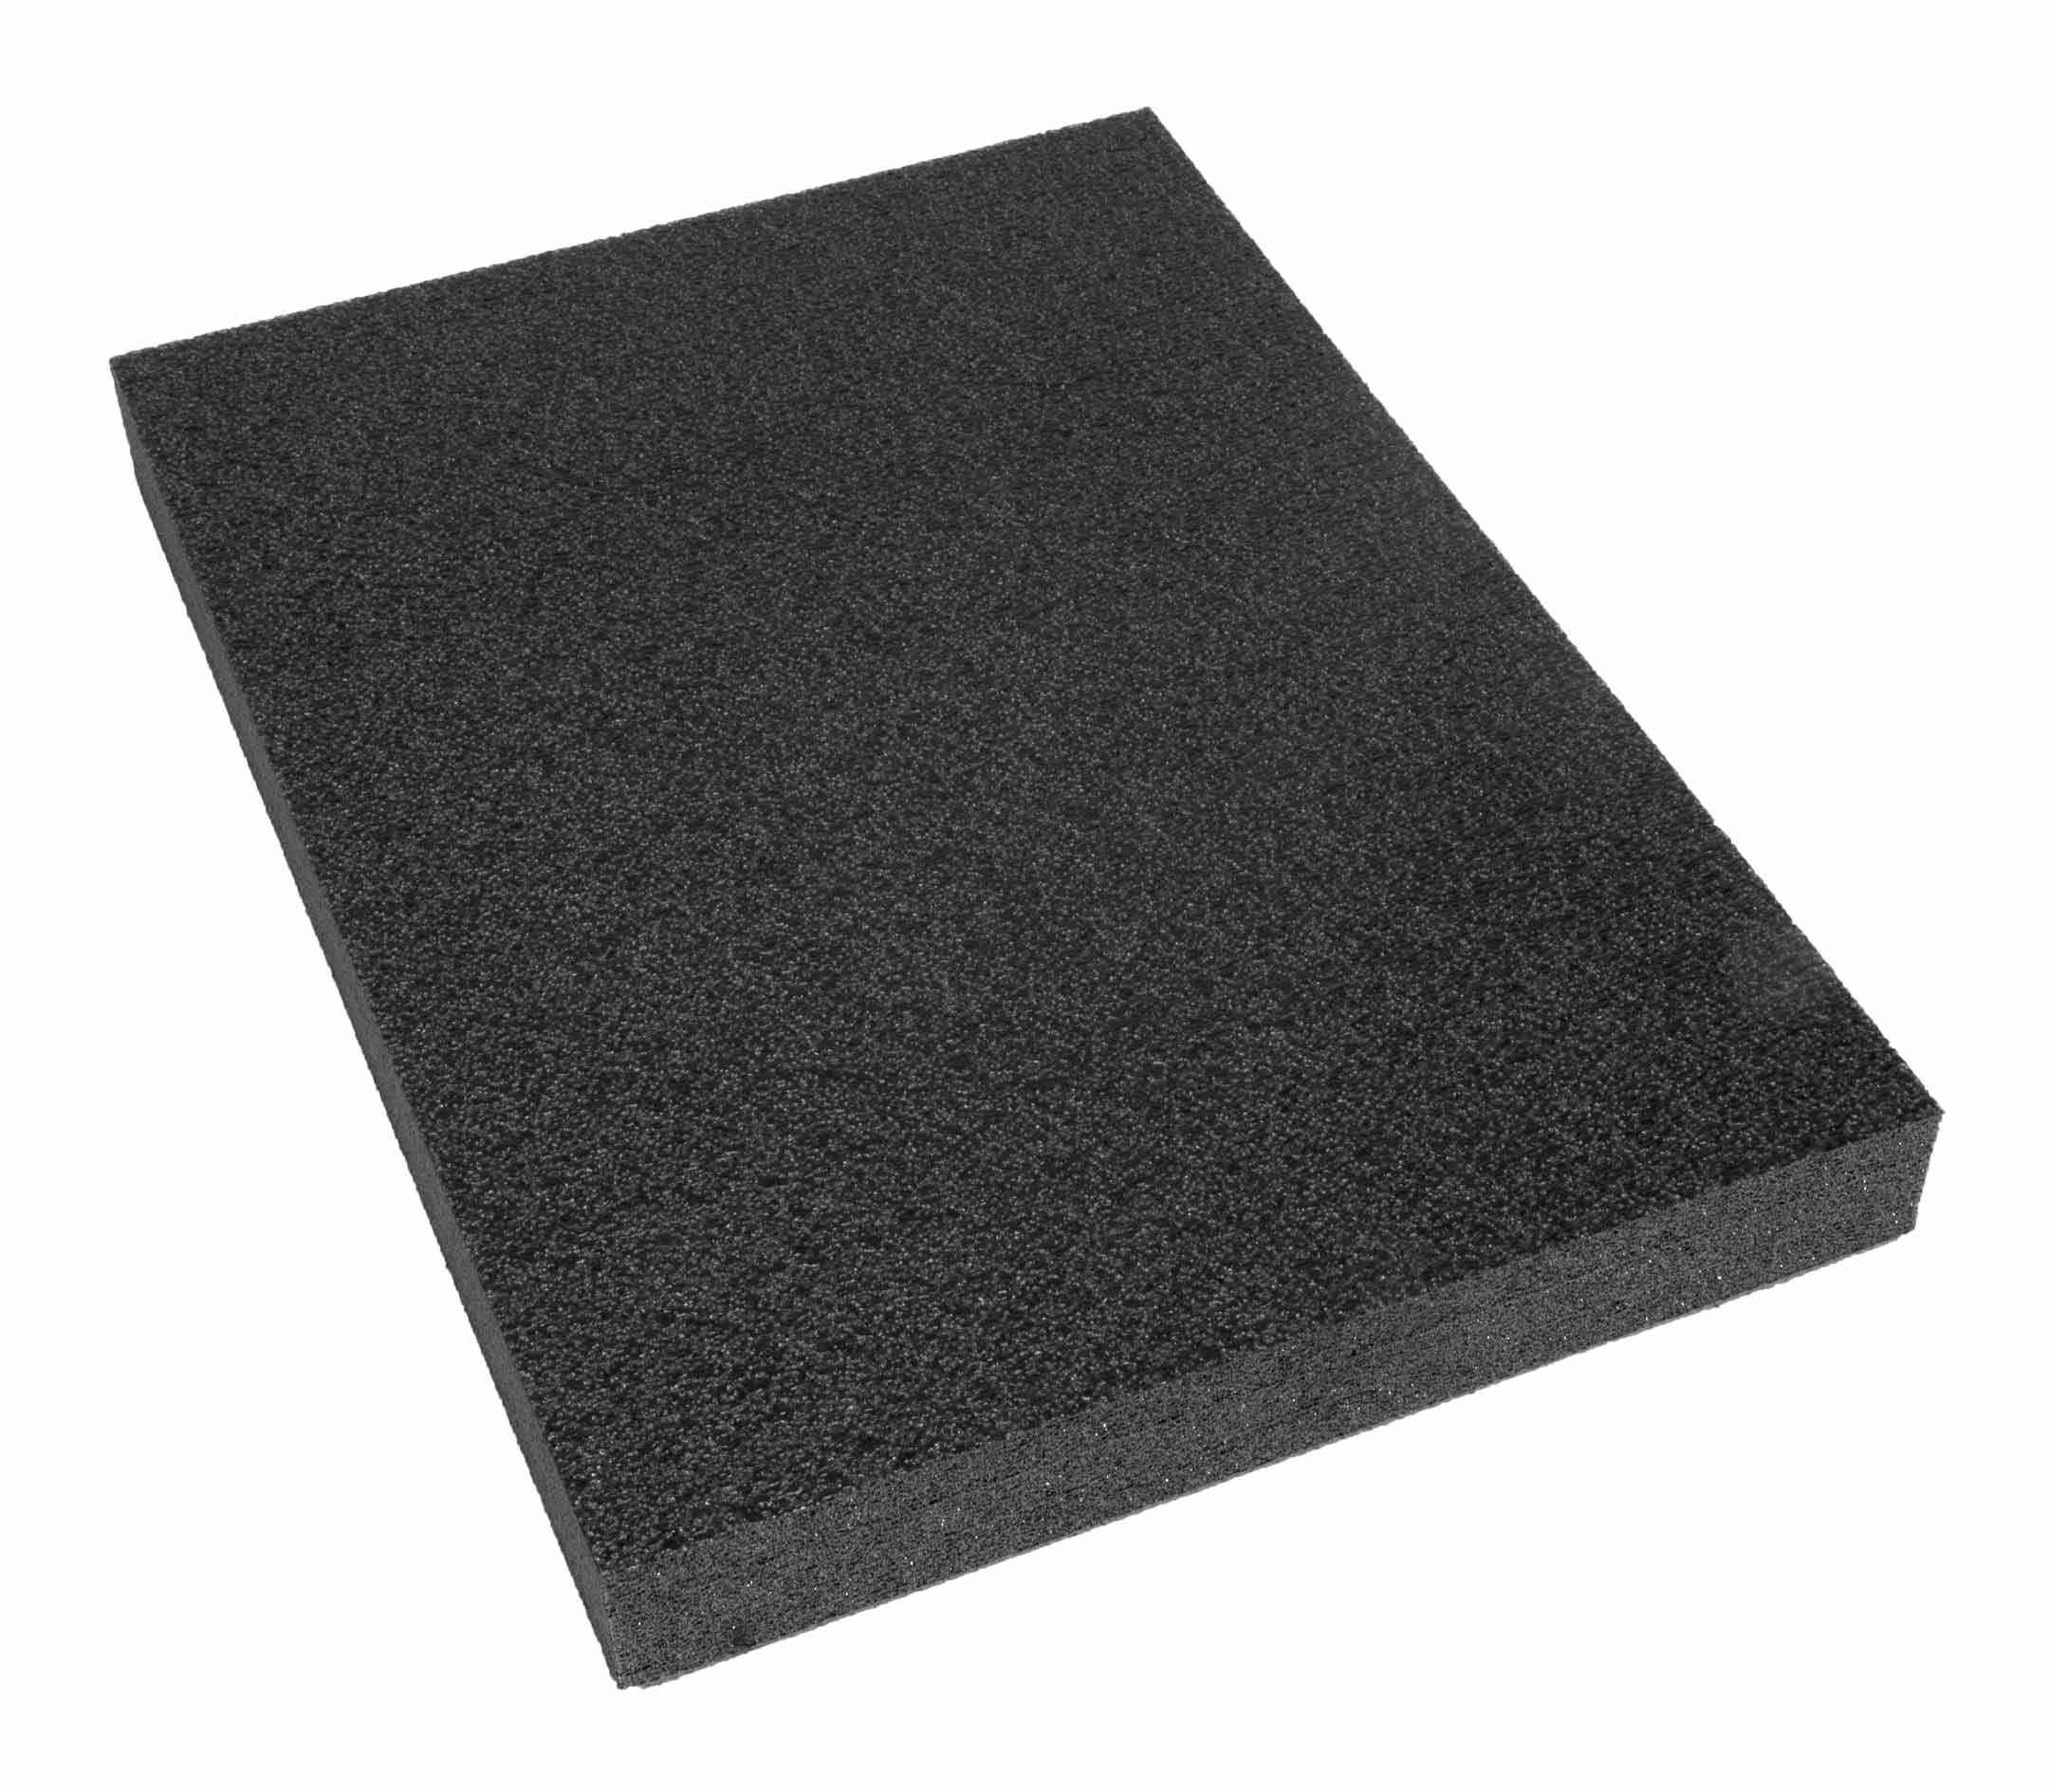 Amylove Polyethylene Foam Sheet Foam Pad for Case Packing Toolbox Storage  and Crafts (4 Pcs, 16 x 12 x 1)